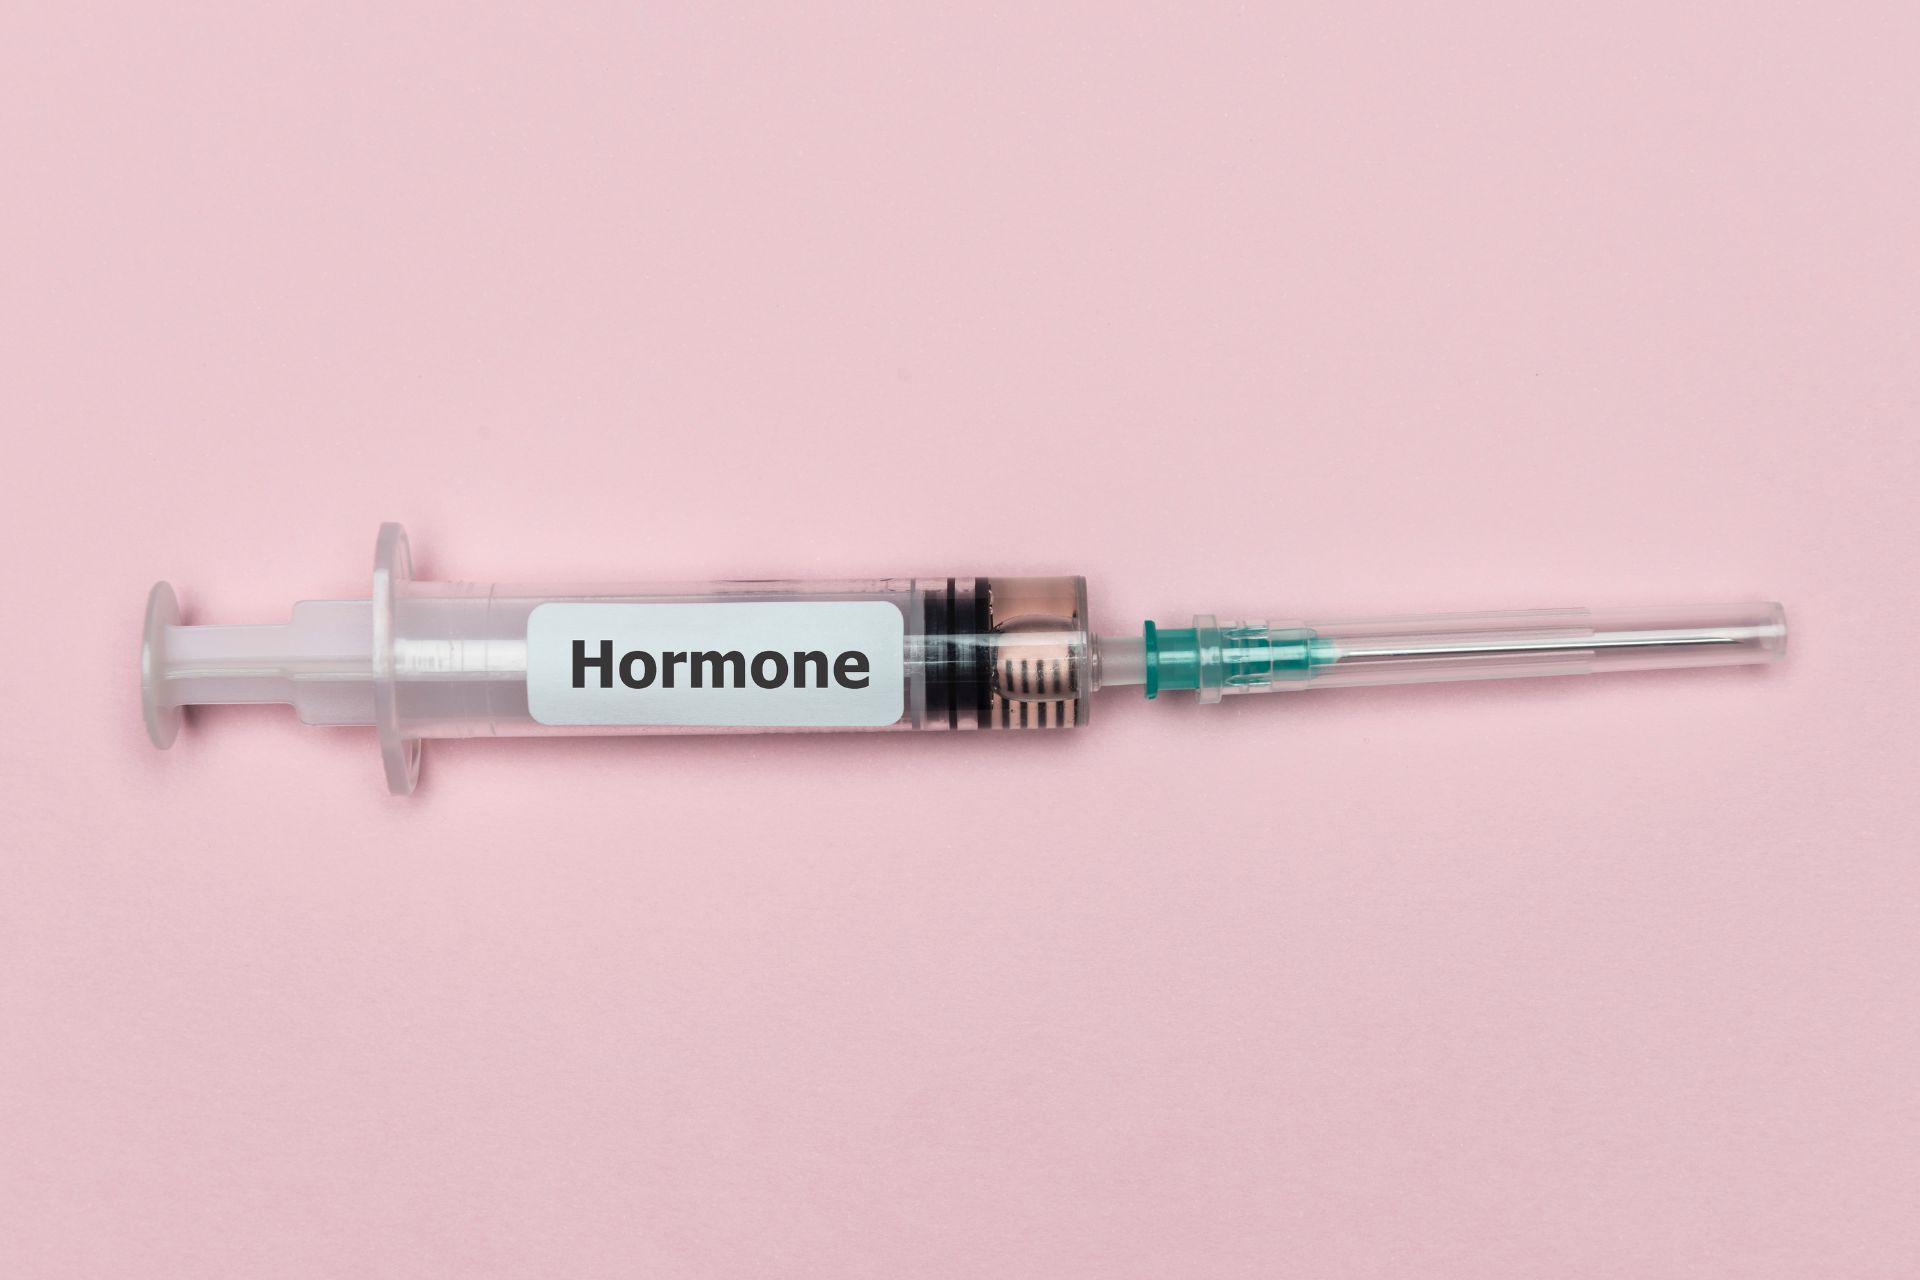  A needle with the word ‘hormone’ written on its casing
